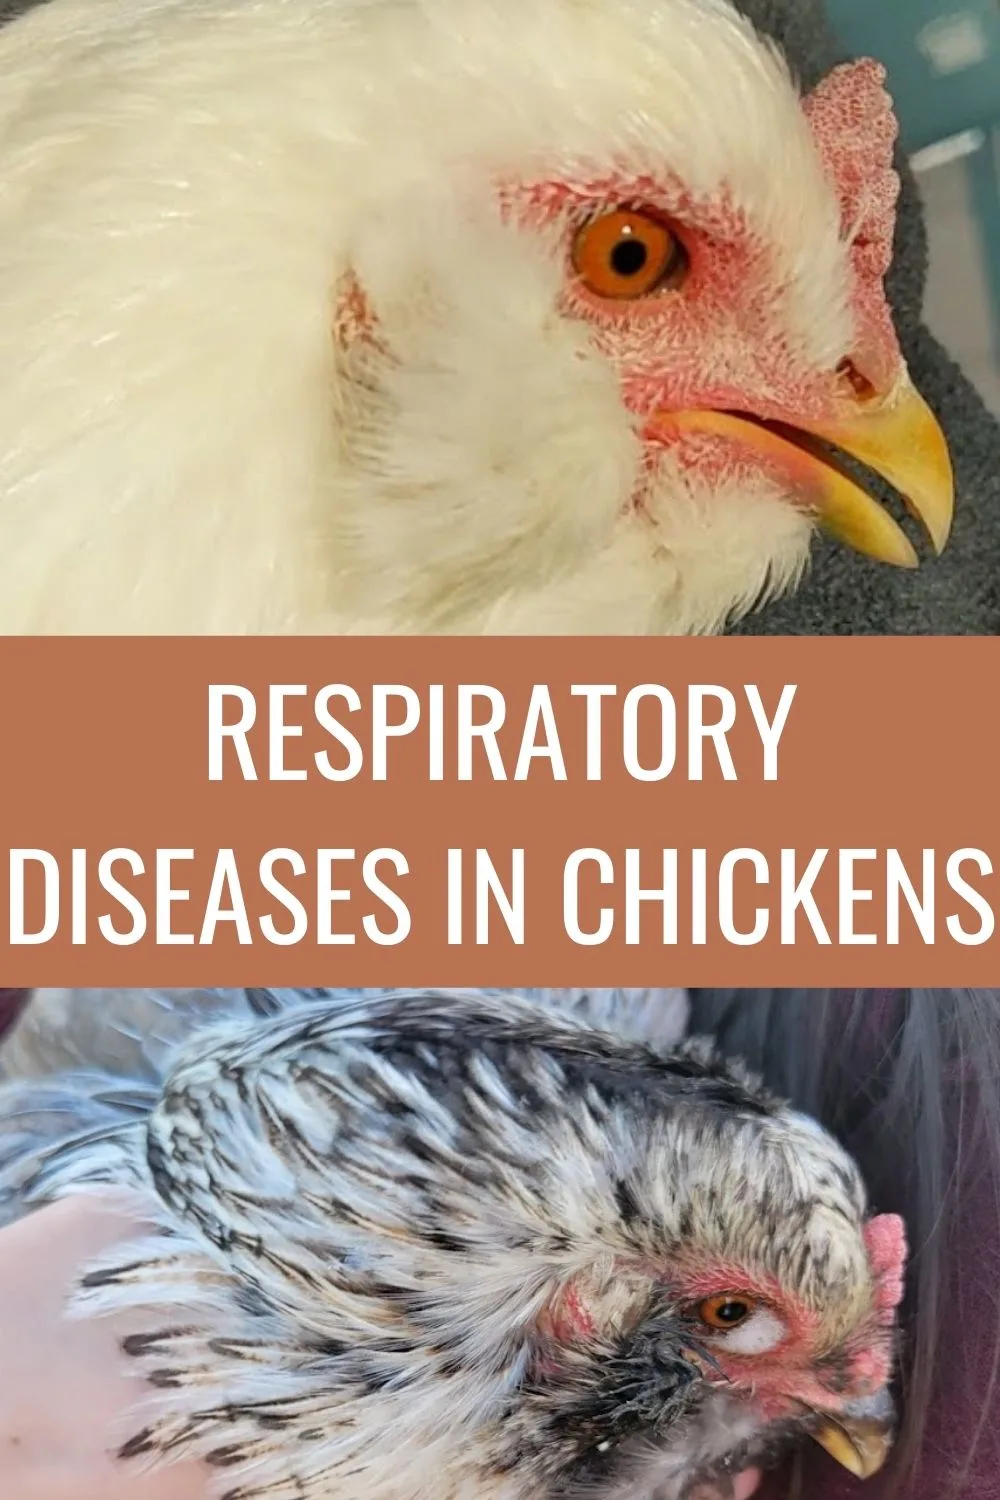 Respiratory diseases in chickens